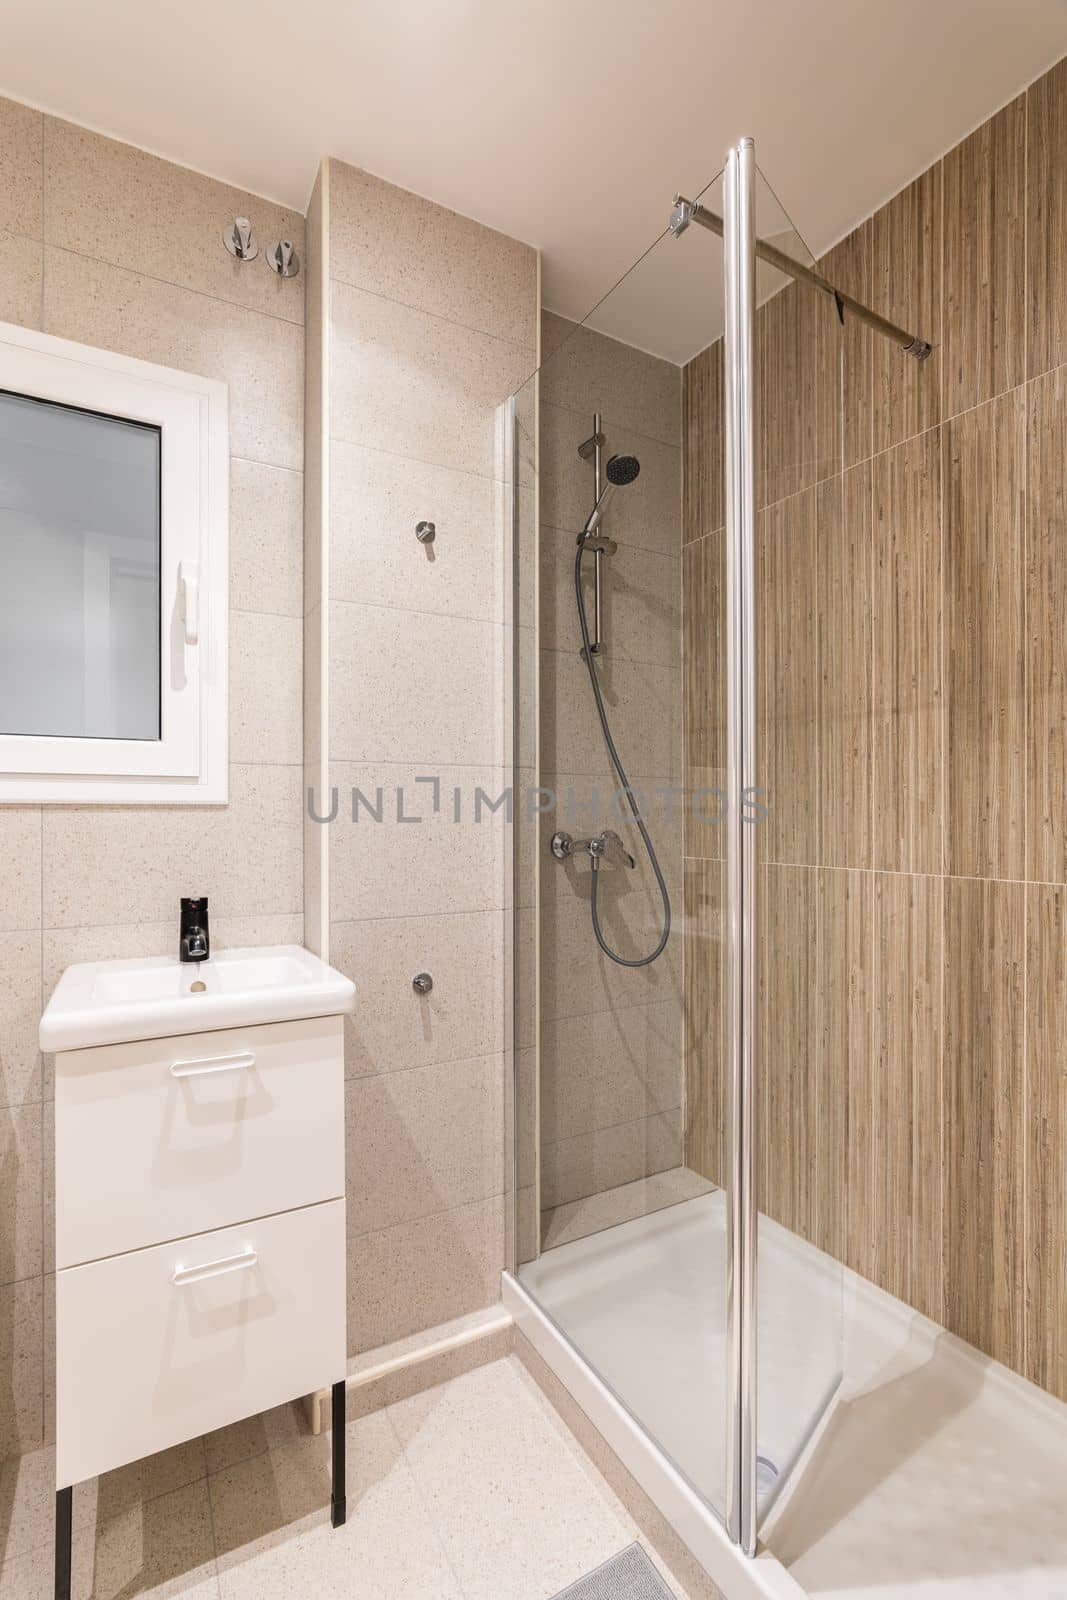 Corner of bathroom with small shower area enclosed by transparent glass wall. Washbasin on table with drawers for bathroom accessories. Window in wall with frosted glass and white frame